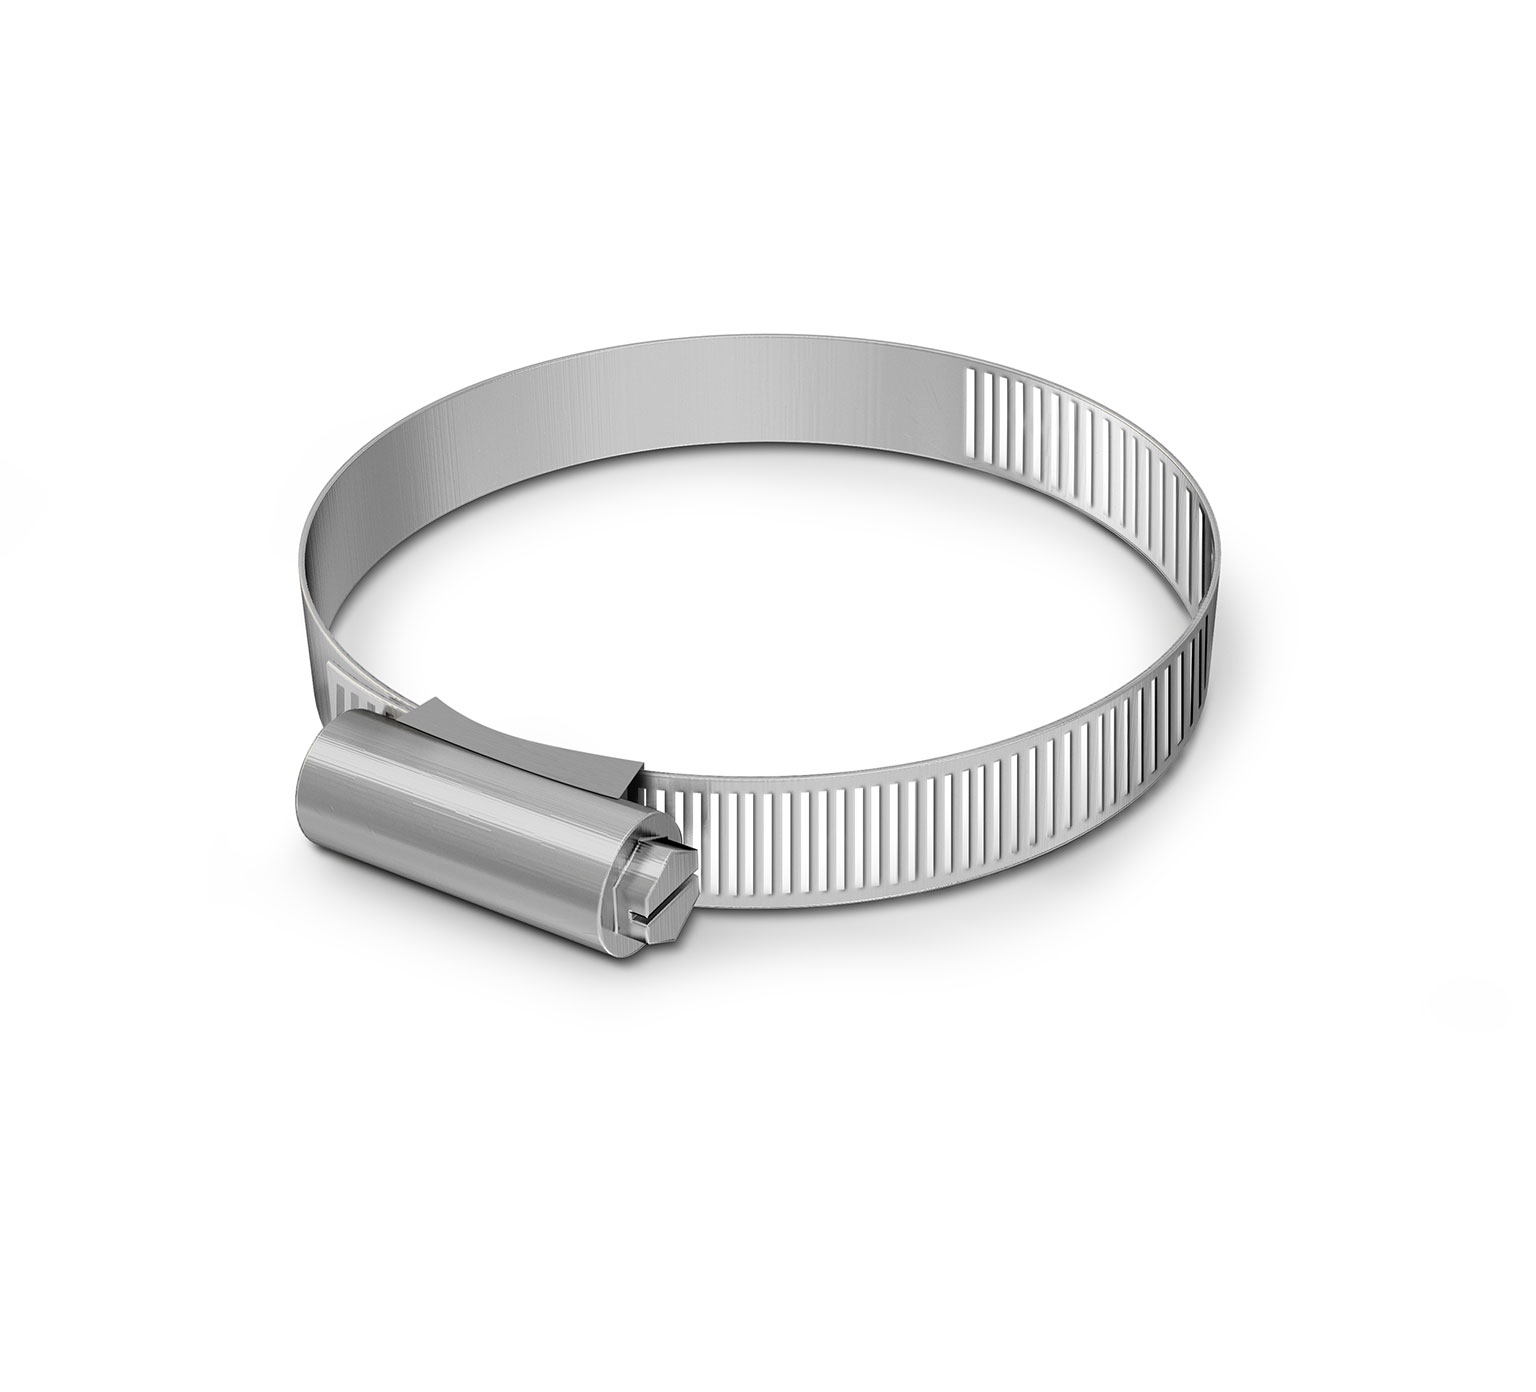 43555 Stainless Steel Hose Clamp - 2.62 - 3.5 in x 0.5 in alt 1